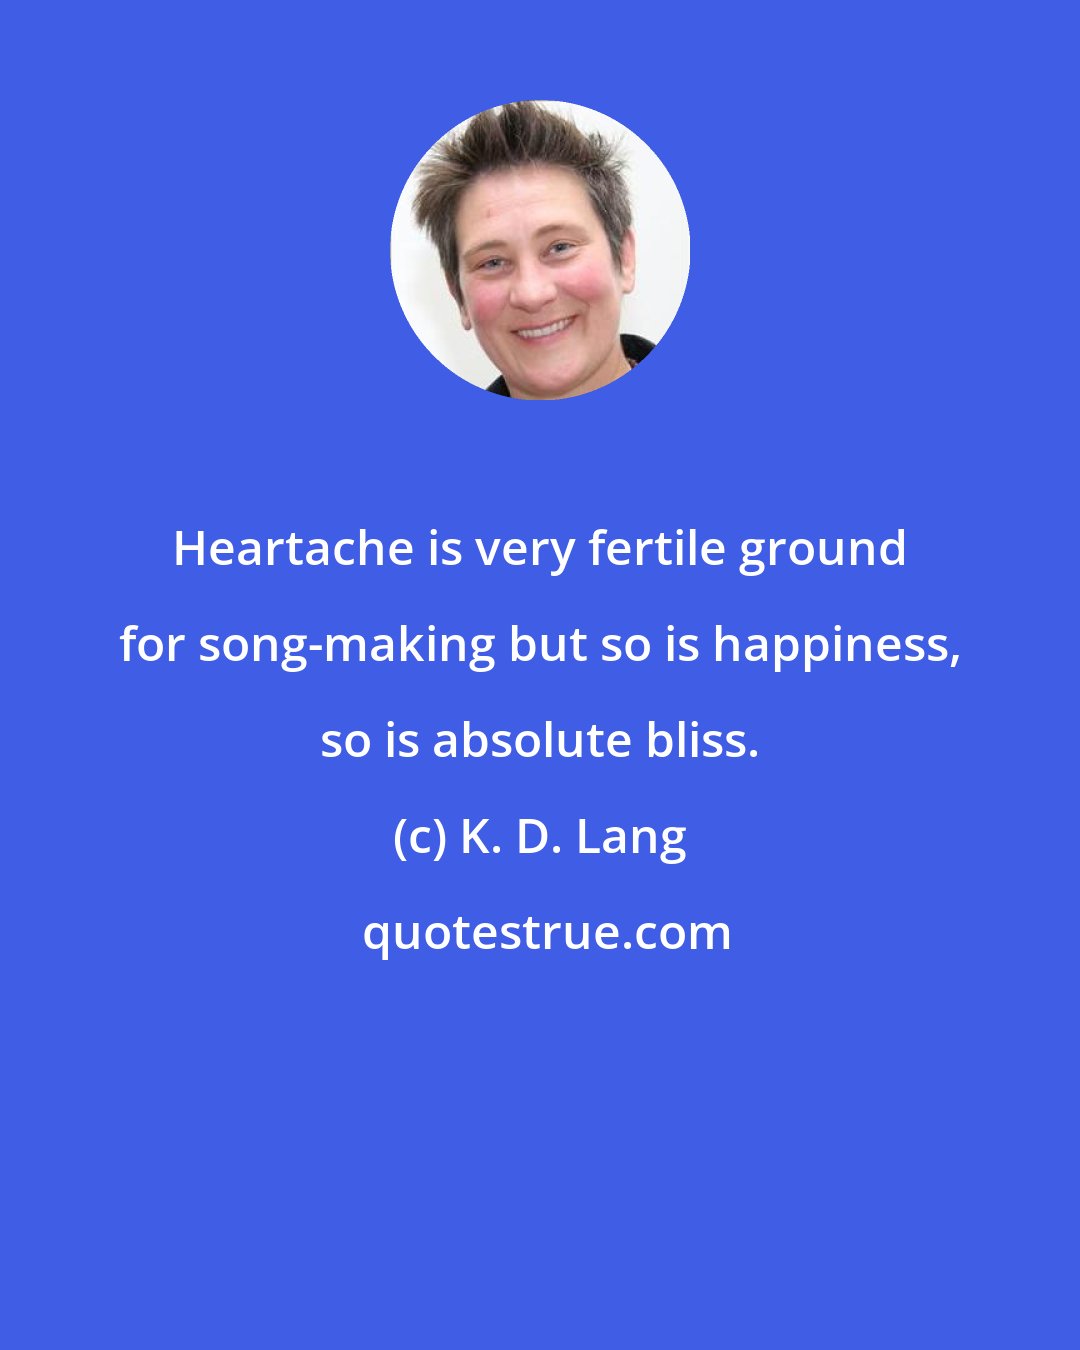 K. D. Lang: Heartache is very fertile ground for song-making but so is happiness, so is absolute bliss.